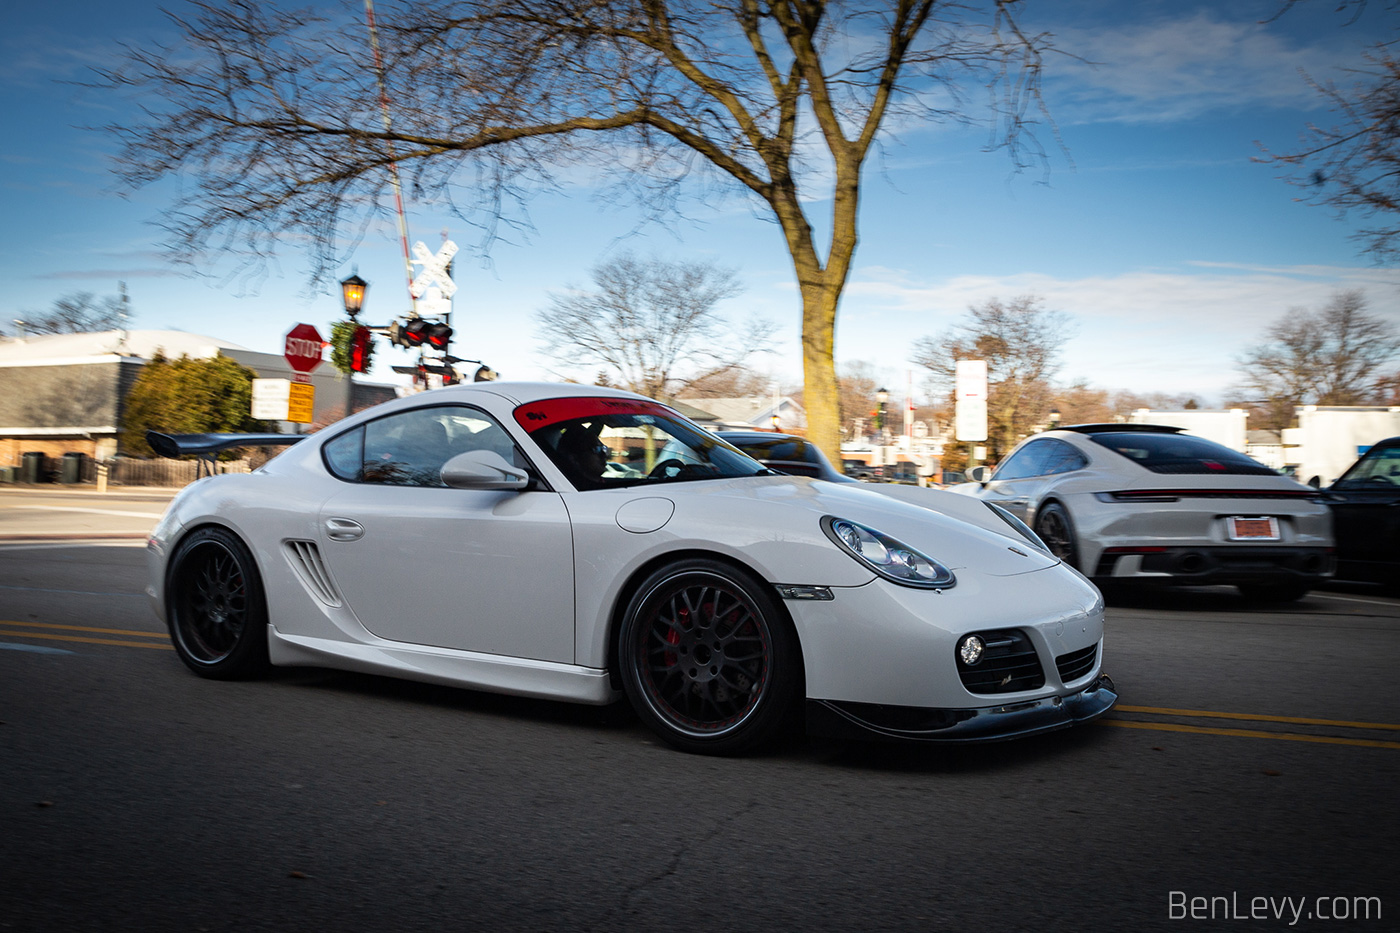 Bagged Cayman S at Burdi Clothing in Hinsdale